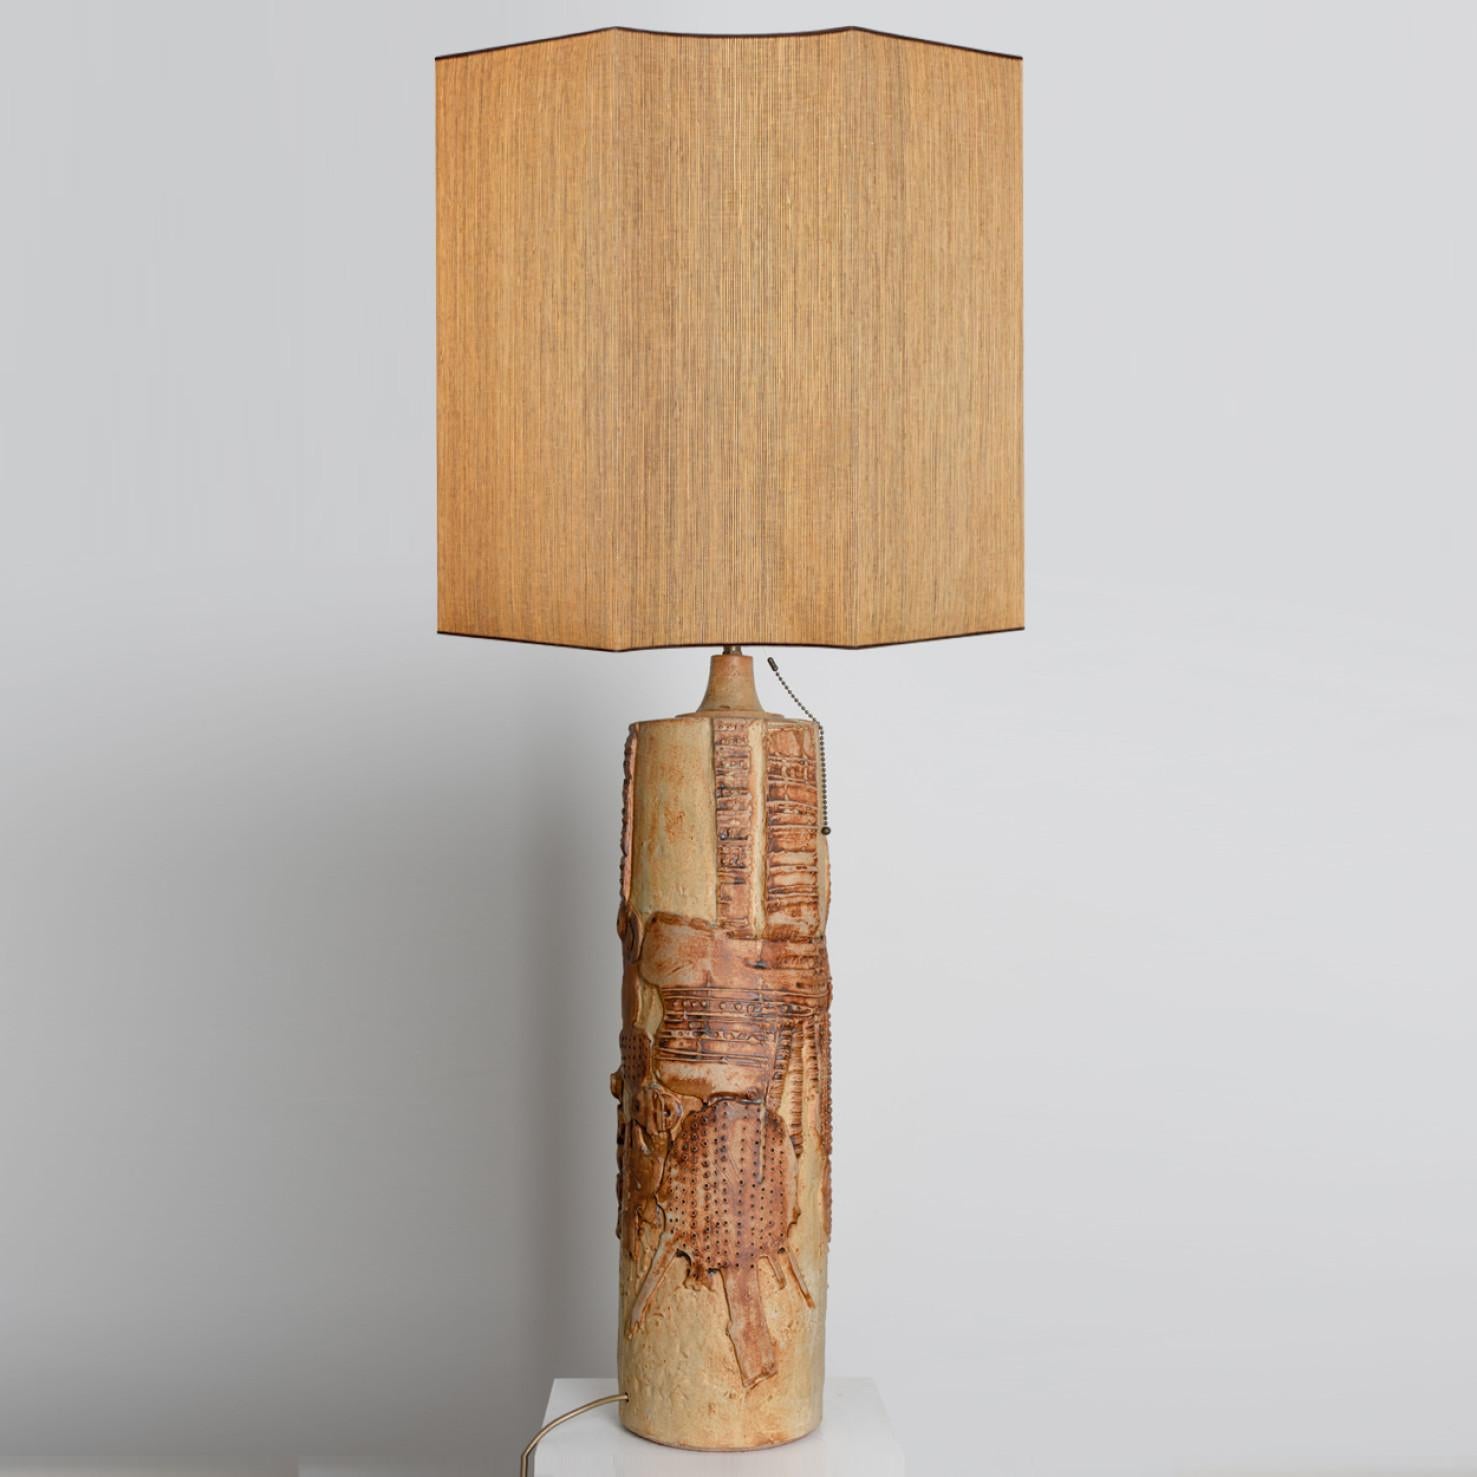 British Large B. Rooke Ceramic Lamp, 1960s with Custom Made Silk Lampshade by René Hoube For Sale